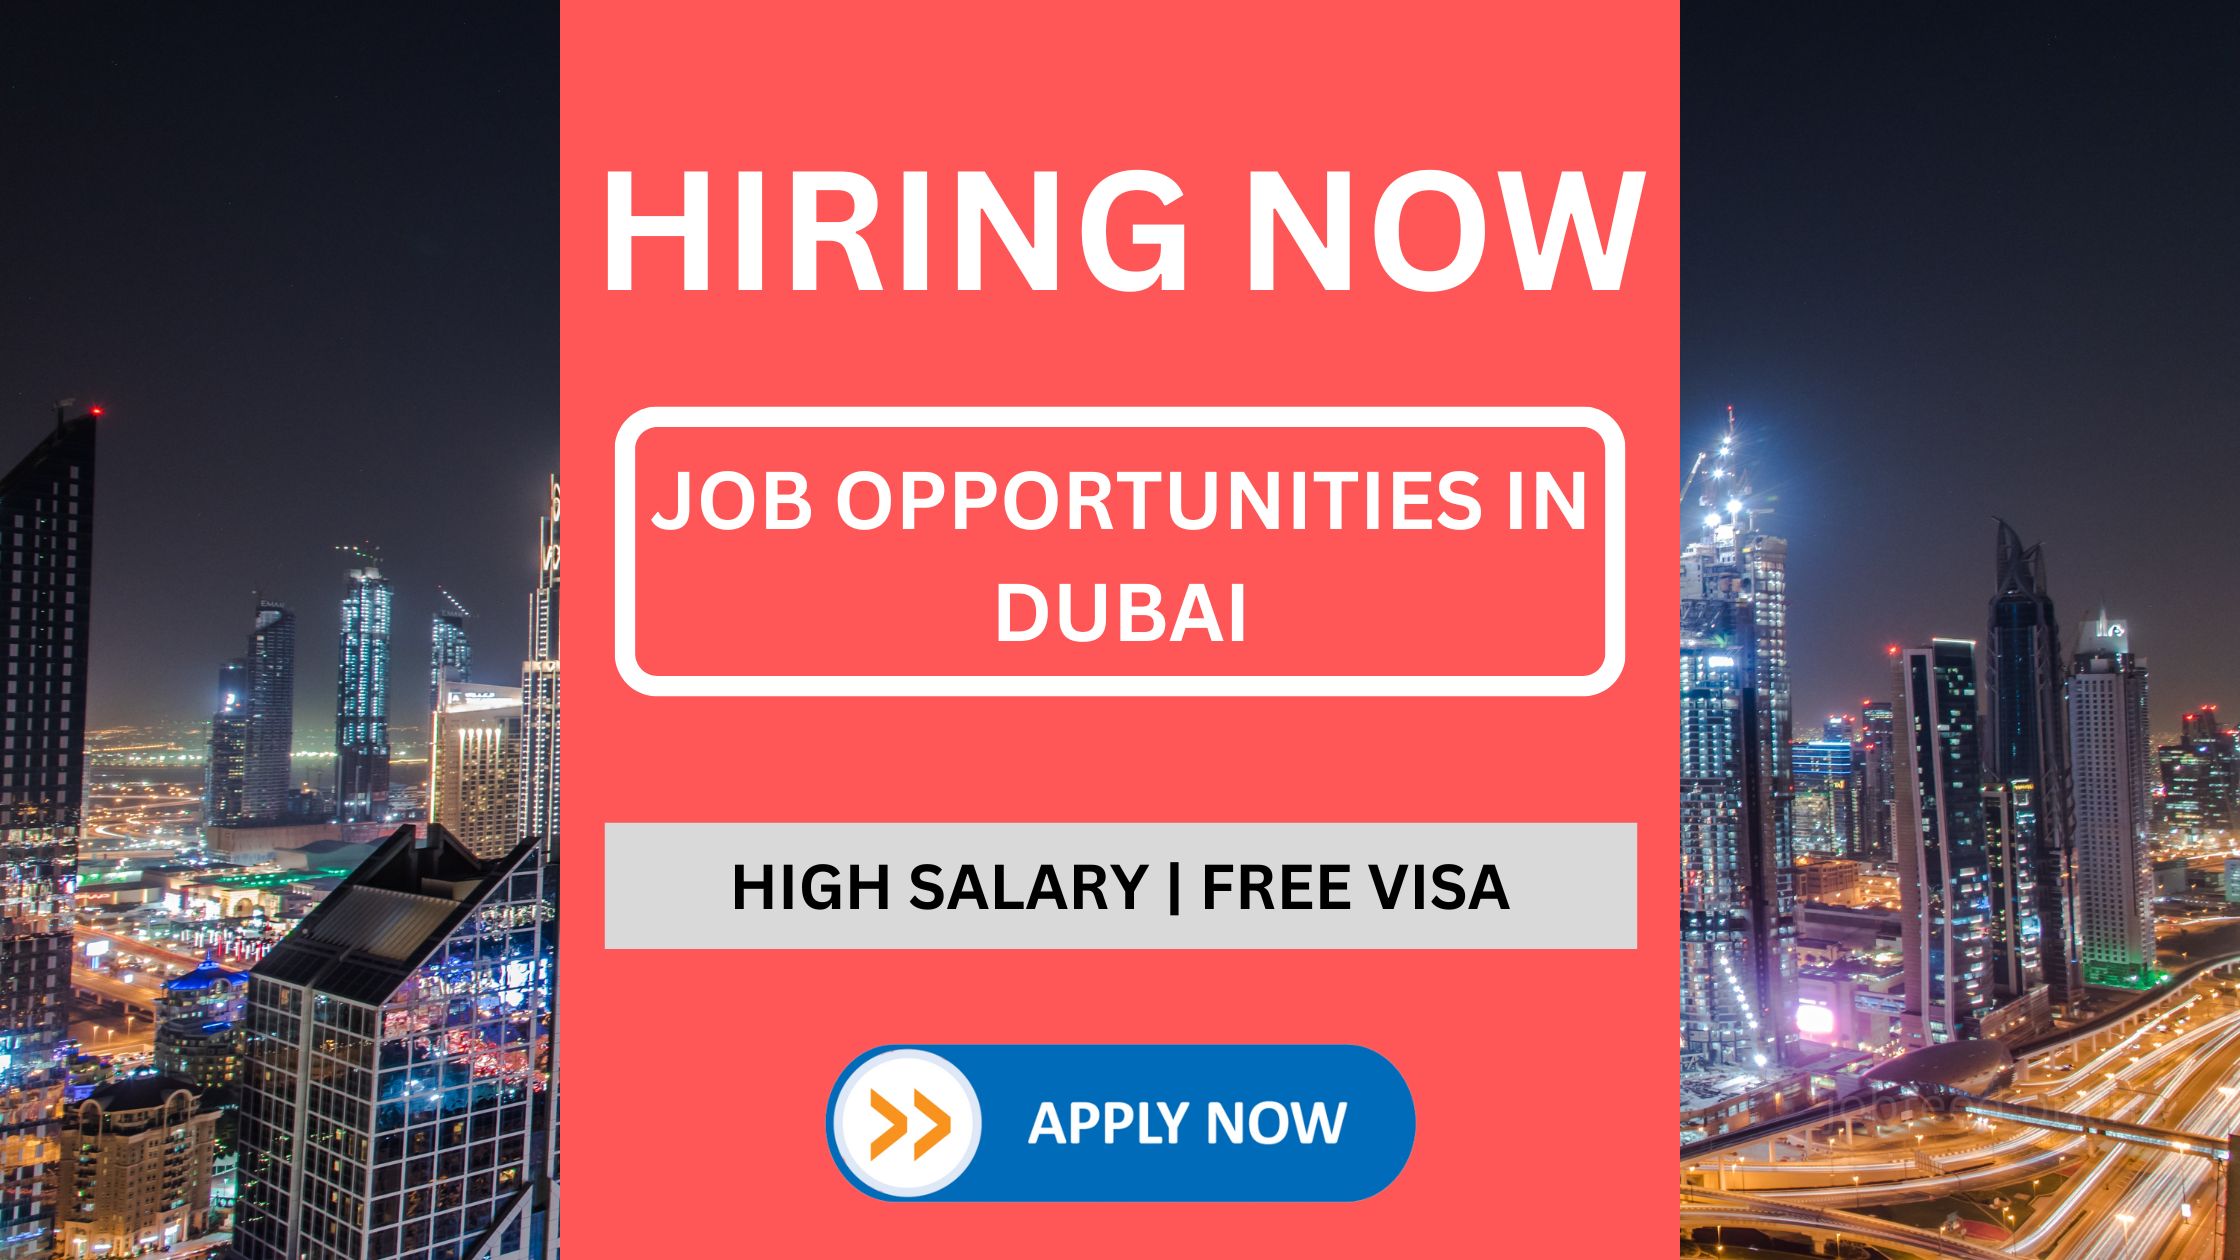 Event Manager, PR Manager, Executive Assistant Job Opportunities in Dubai